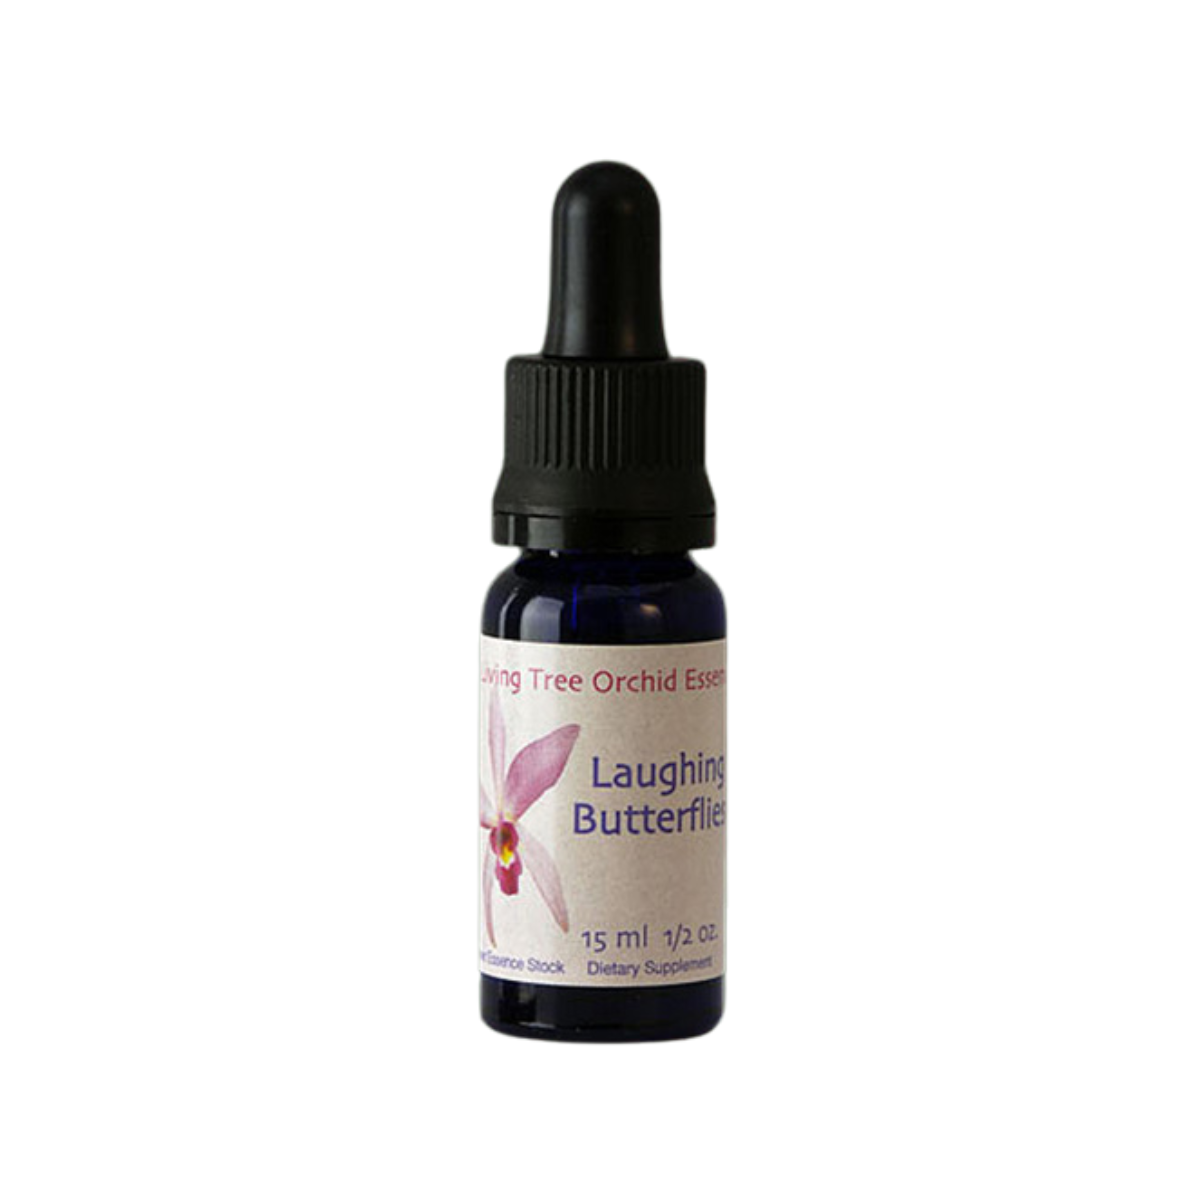 Laughing Butterflies, Orchid Essence on sale!